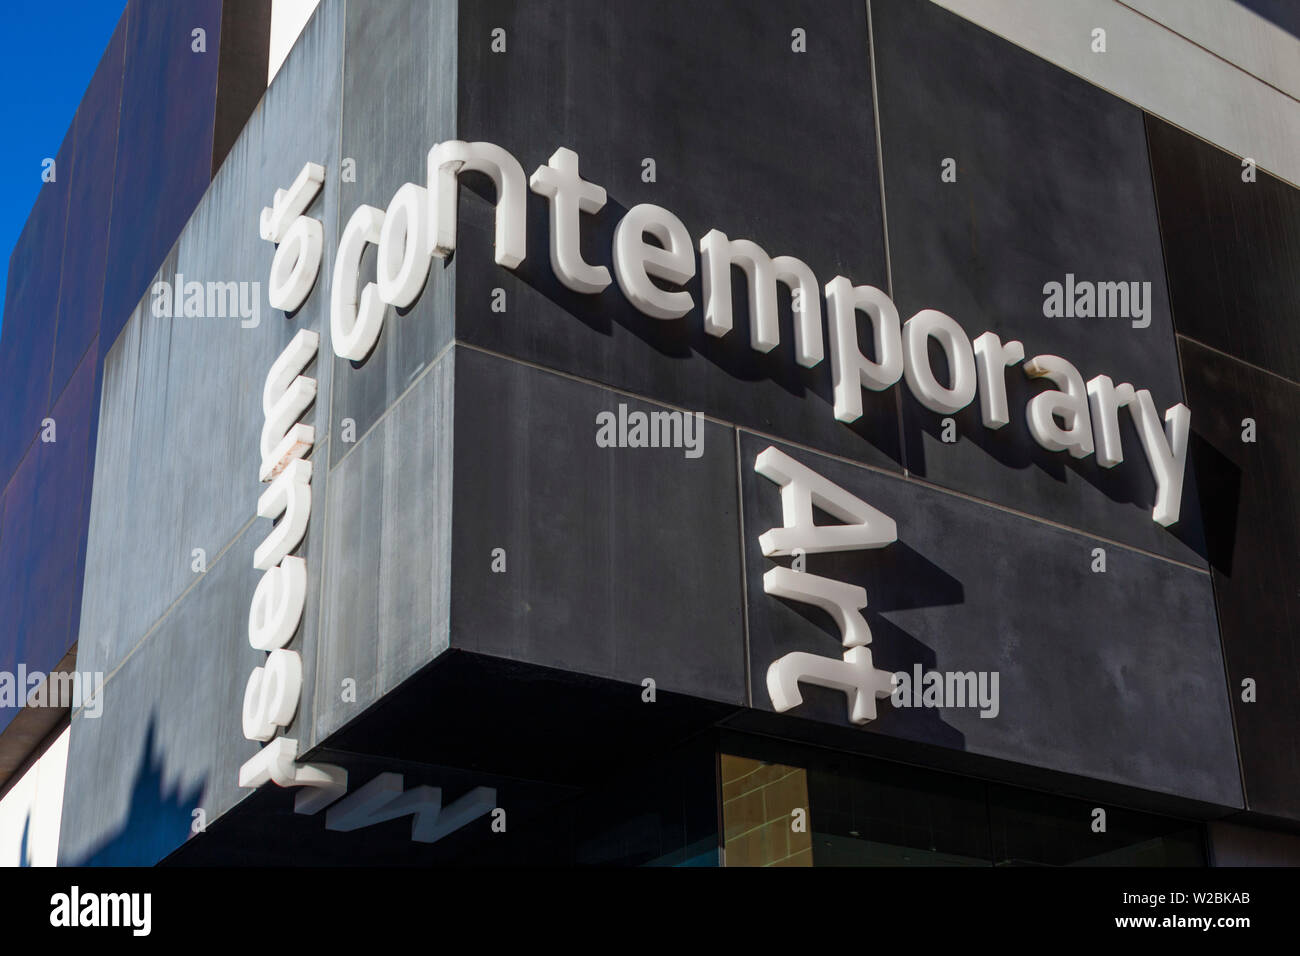 Australia, New South Wales, NSW, Sydney, Circular Quay, Museum of Contemporary Art, sign Stock Photo